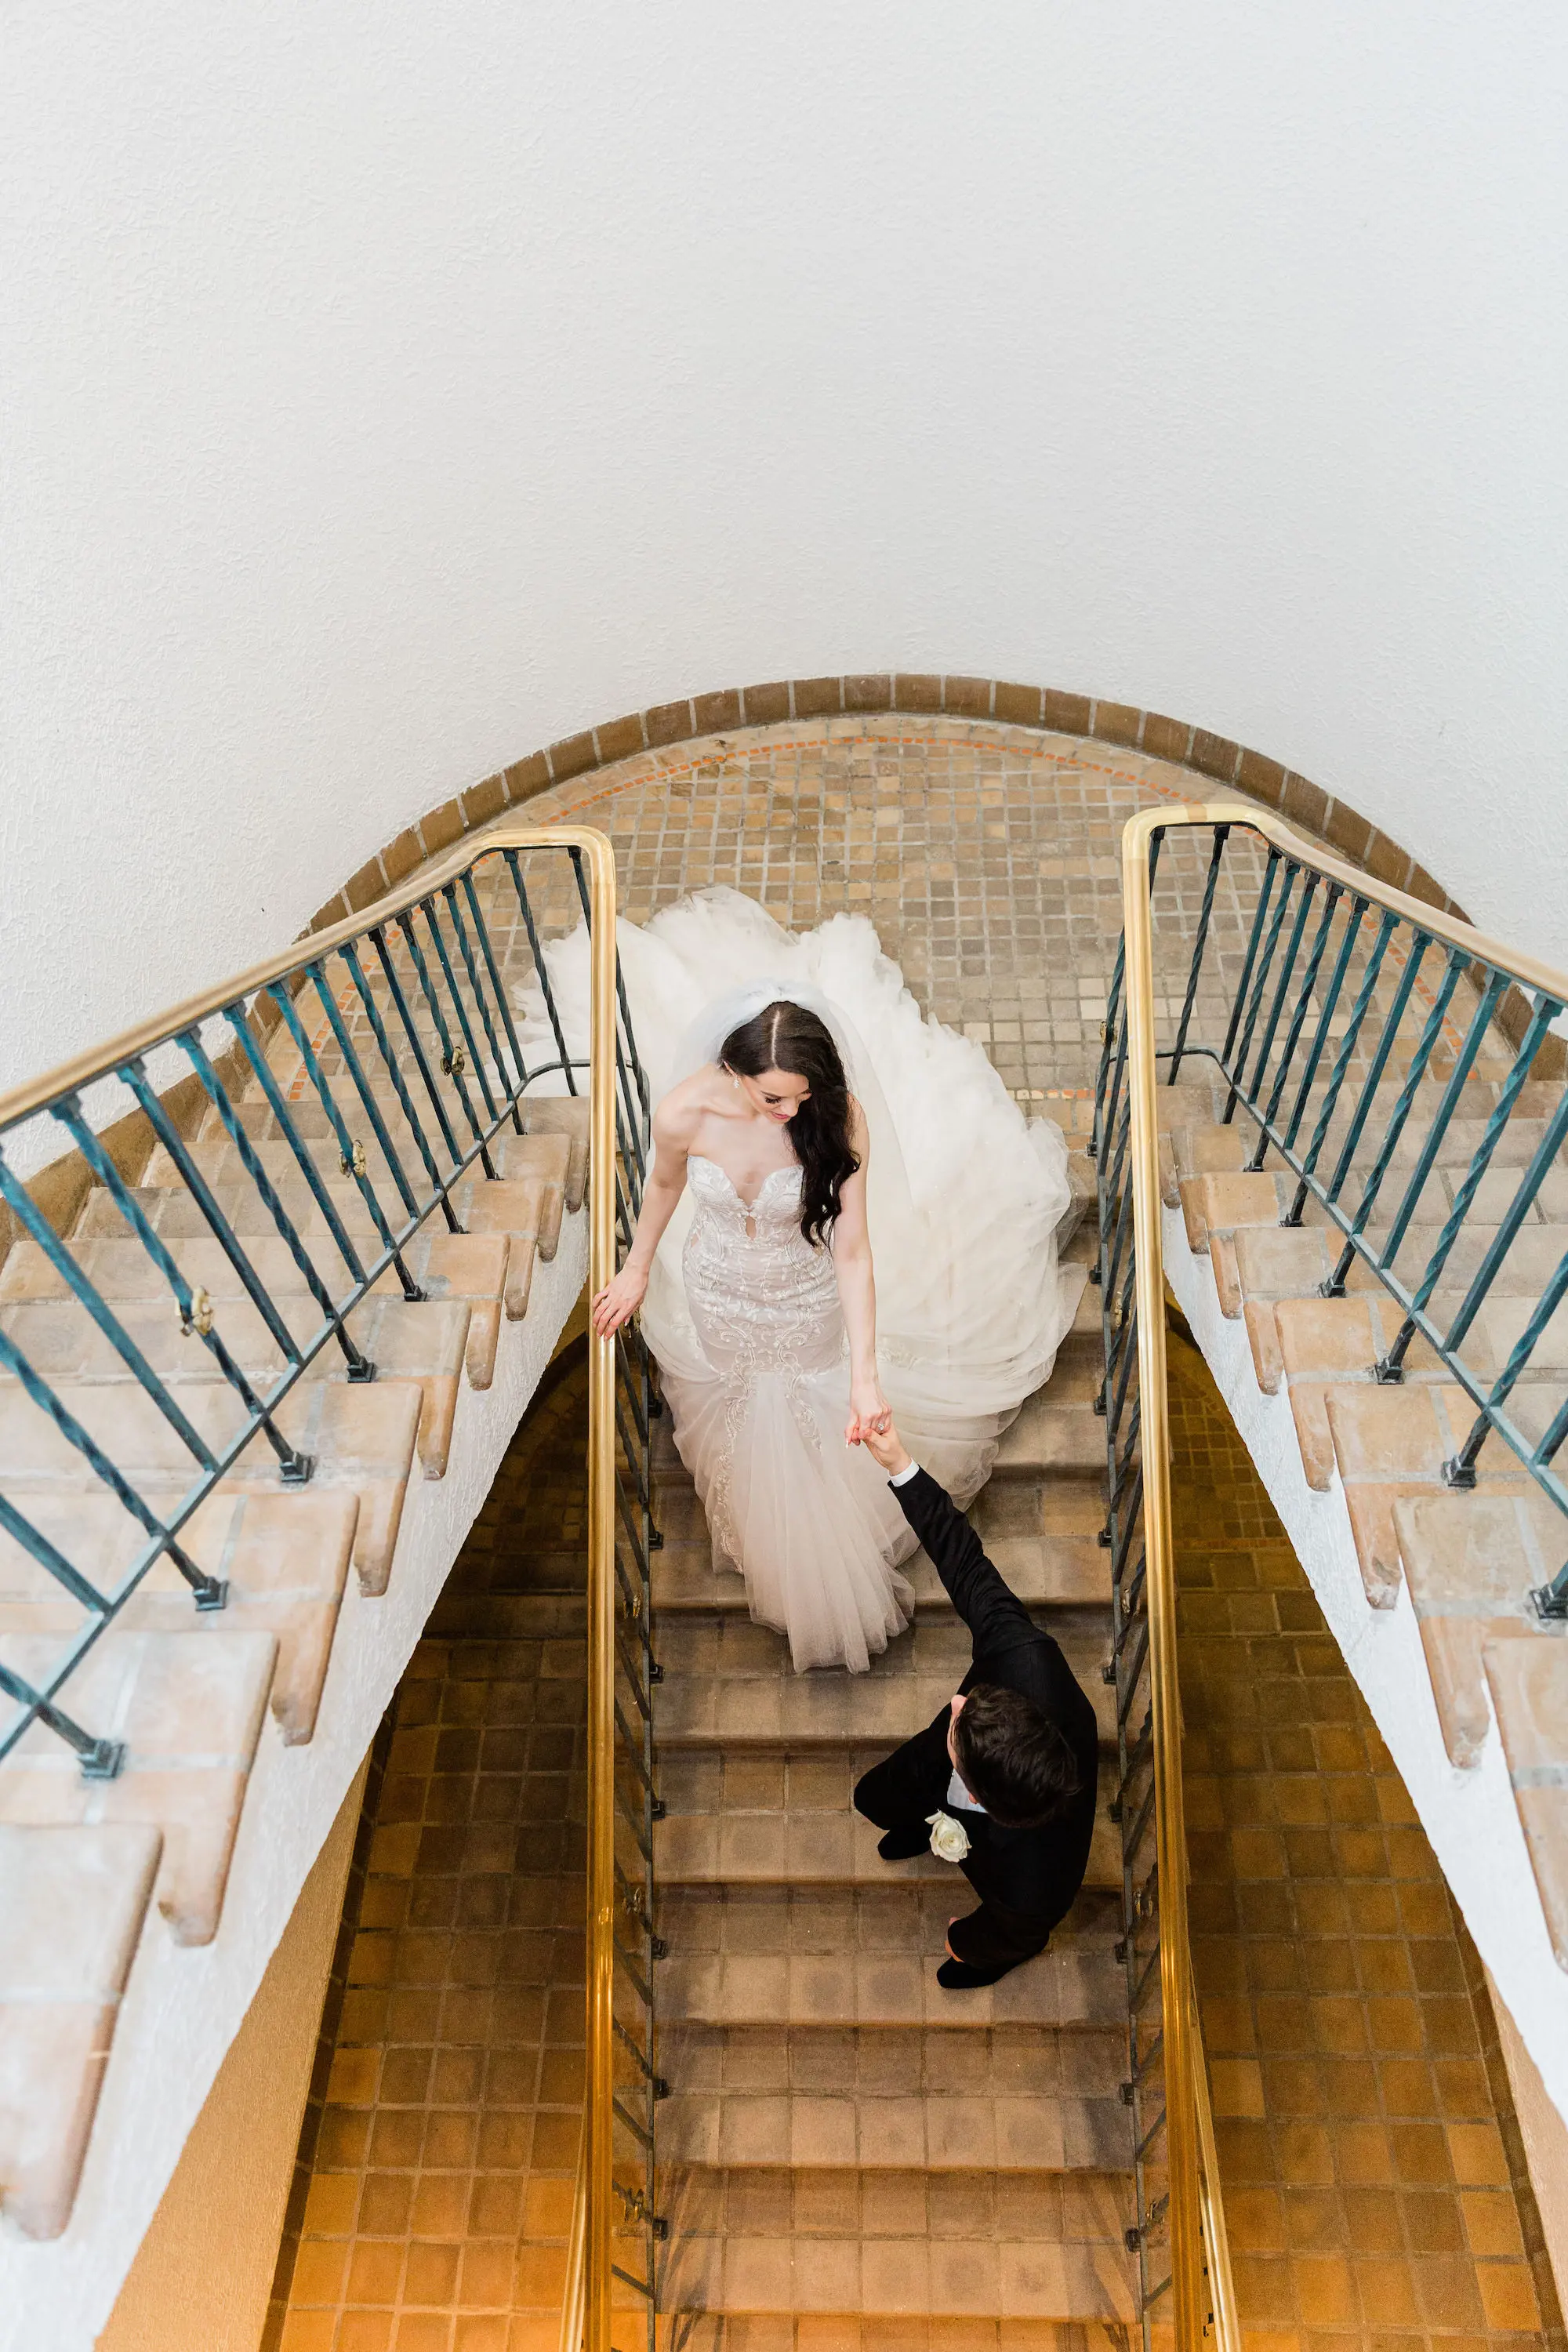 Bride and Groom Portrait of Walking Down Grand Staircase | Elegant Strapless Trumpet Gown Inspiration | Gown With Beading and Lace Appliqué Ideas | Dress by Ines Di Santo Inspiration | Natural Hair in Loose Waves Ideas | Soft Flowing Inspiration | St Pete Photographer K&K Photography | The Vinoy